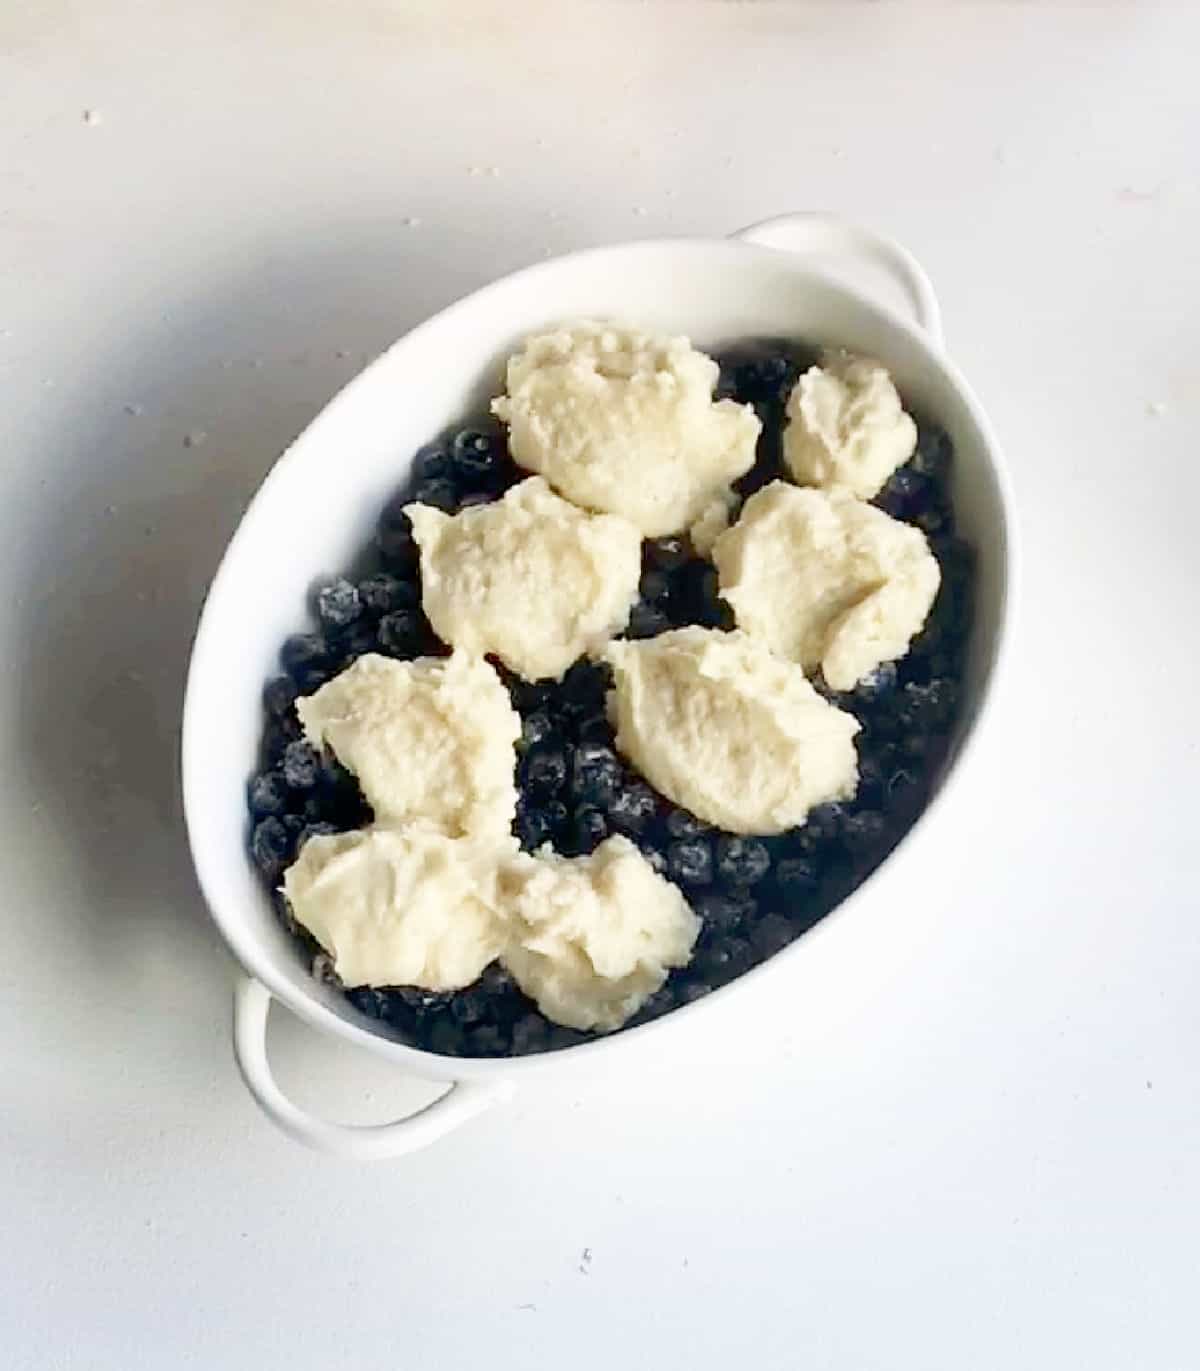 Top view of oval white dish with unbaked blueberry cobbler on a white surface.